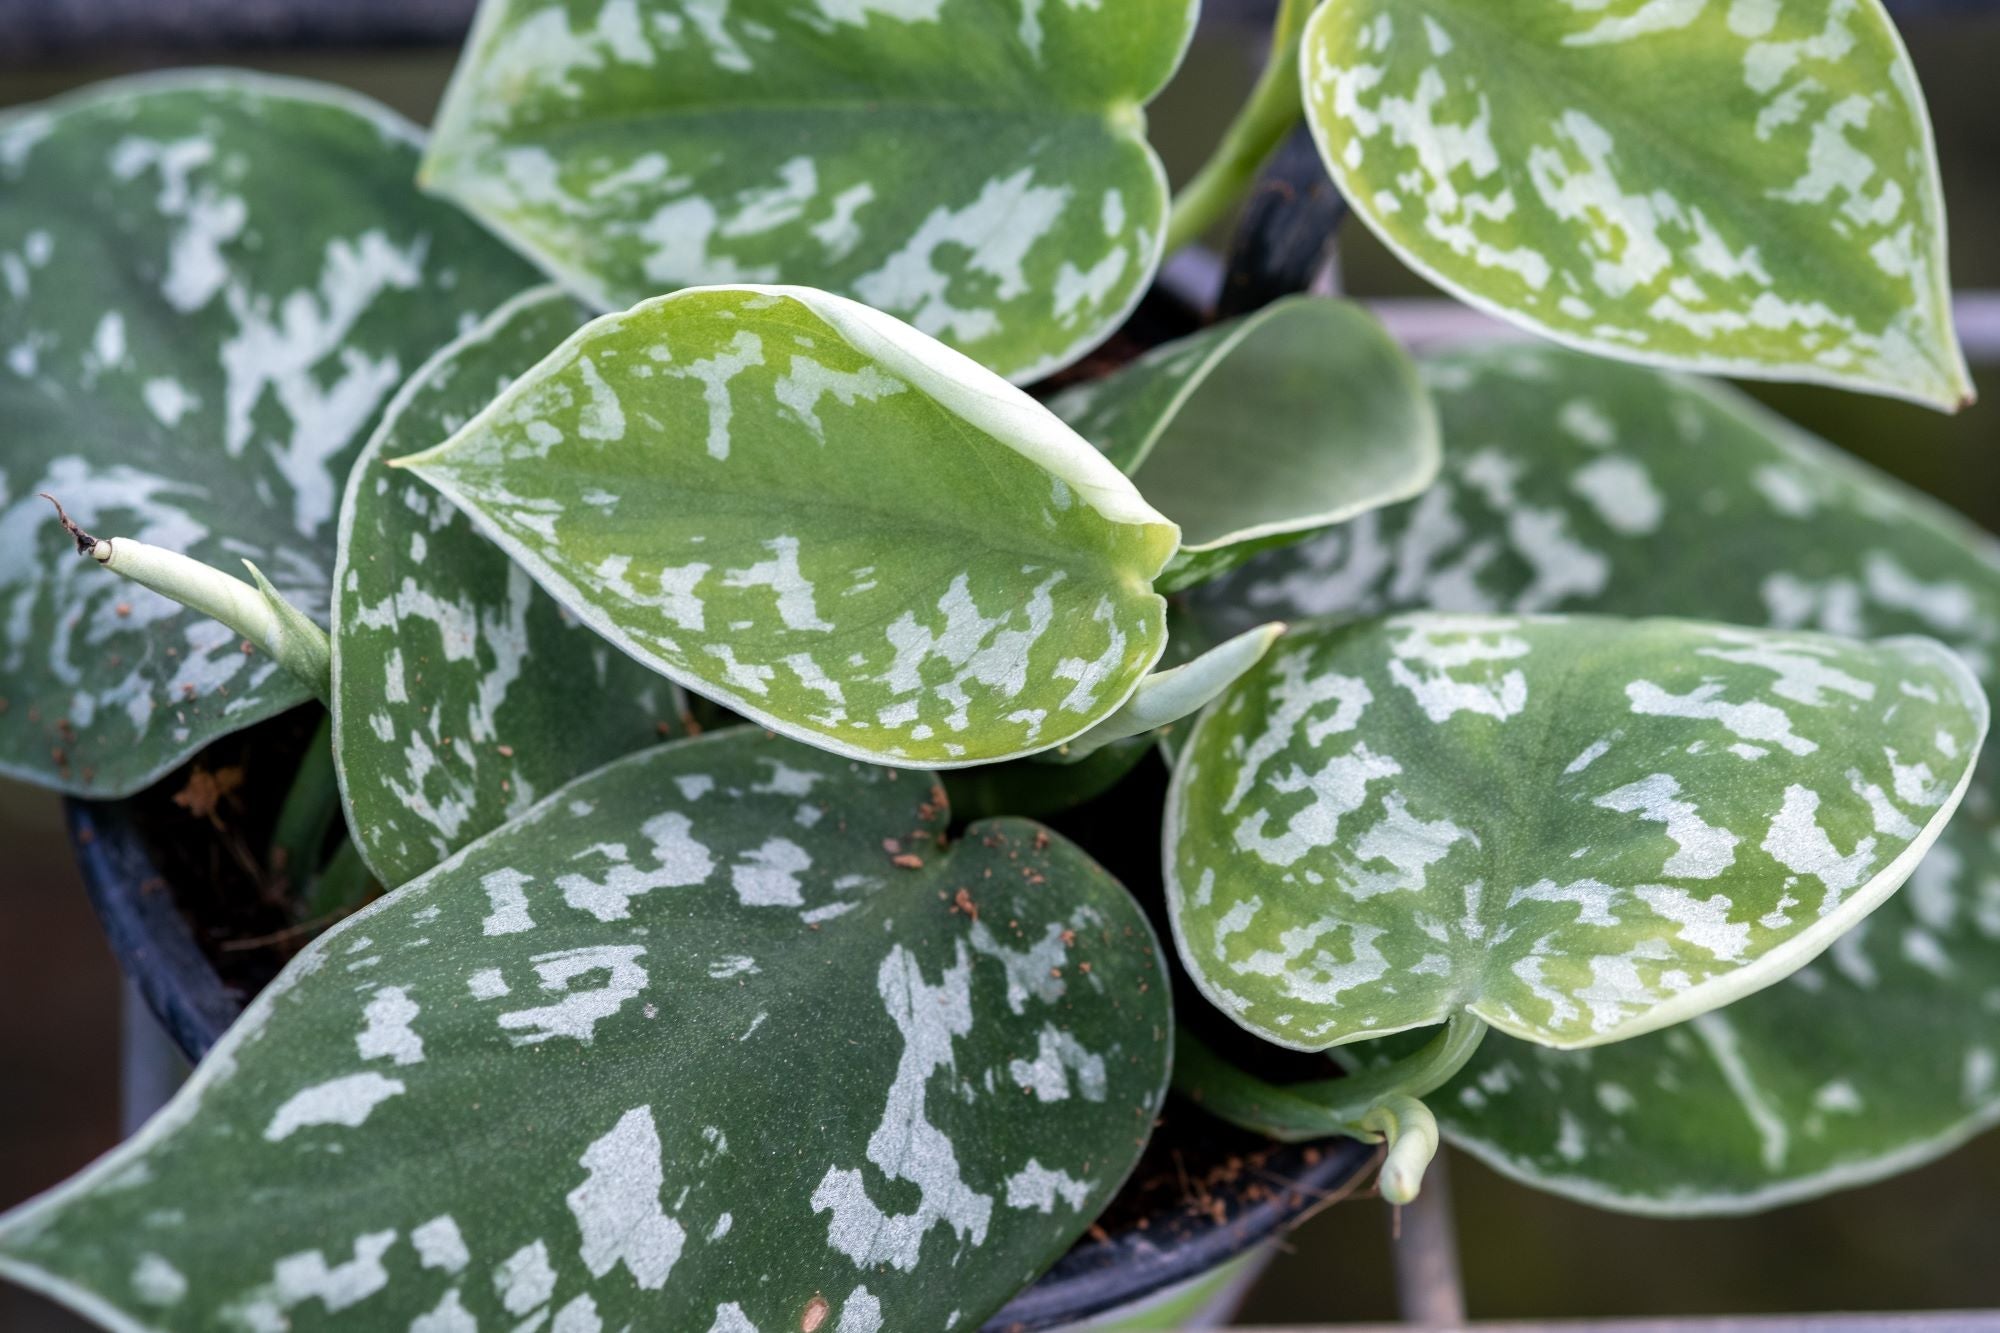 A close-up photo of a Scindapsus pictus, also known as a satin pothos, in a nursery pot. The plant has a fresh new leaf unfurling and some dirt on its leaves. The sunlight highlights the texture and color of the leaves.